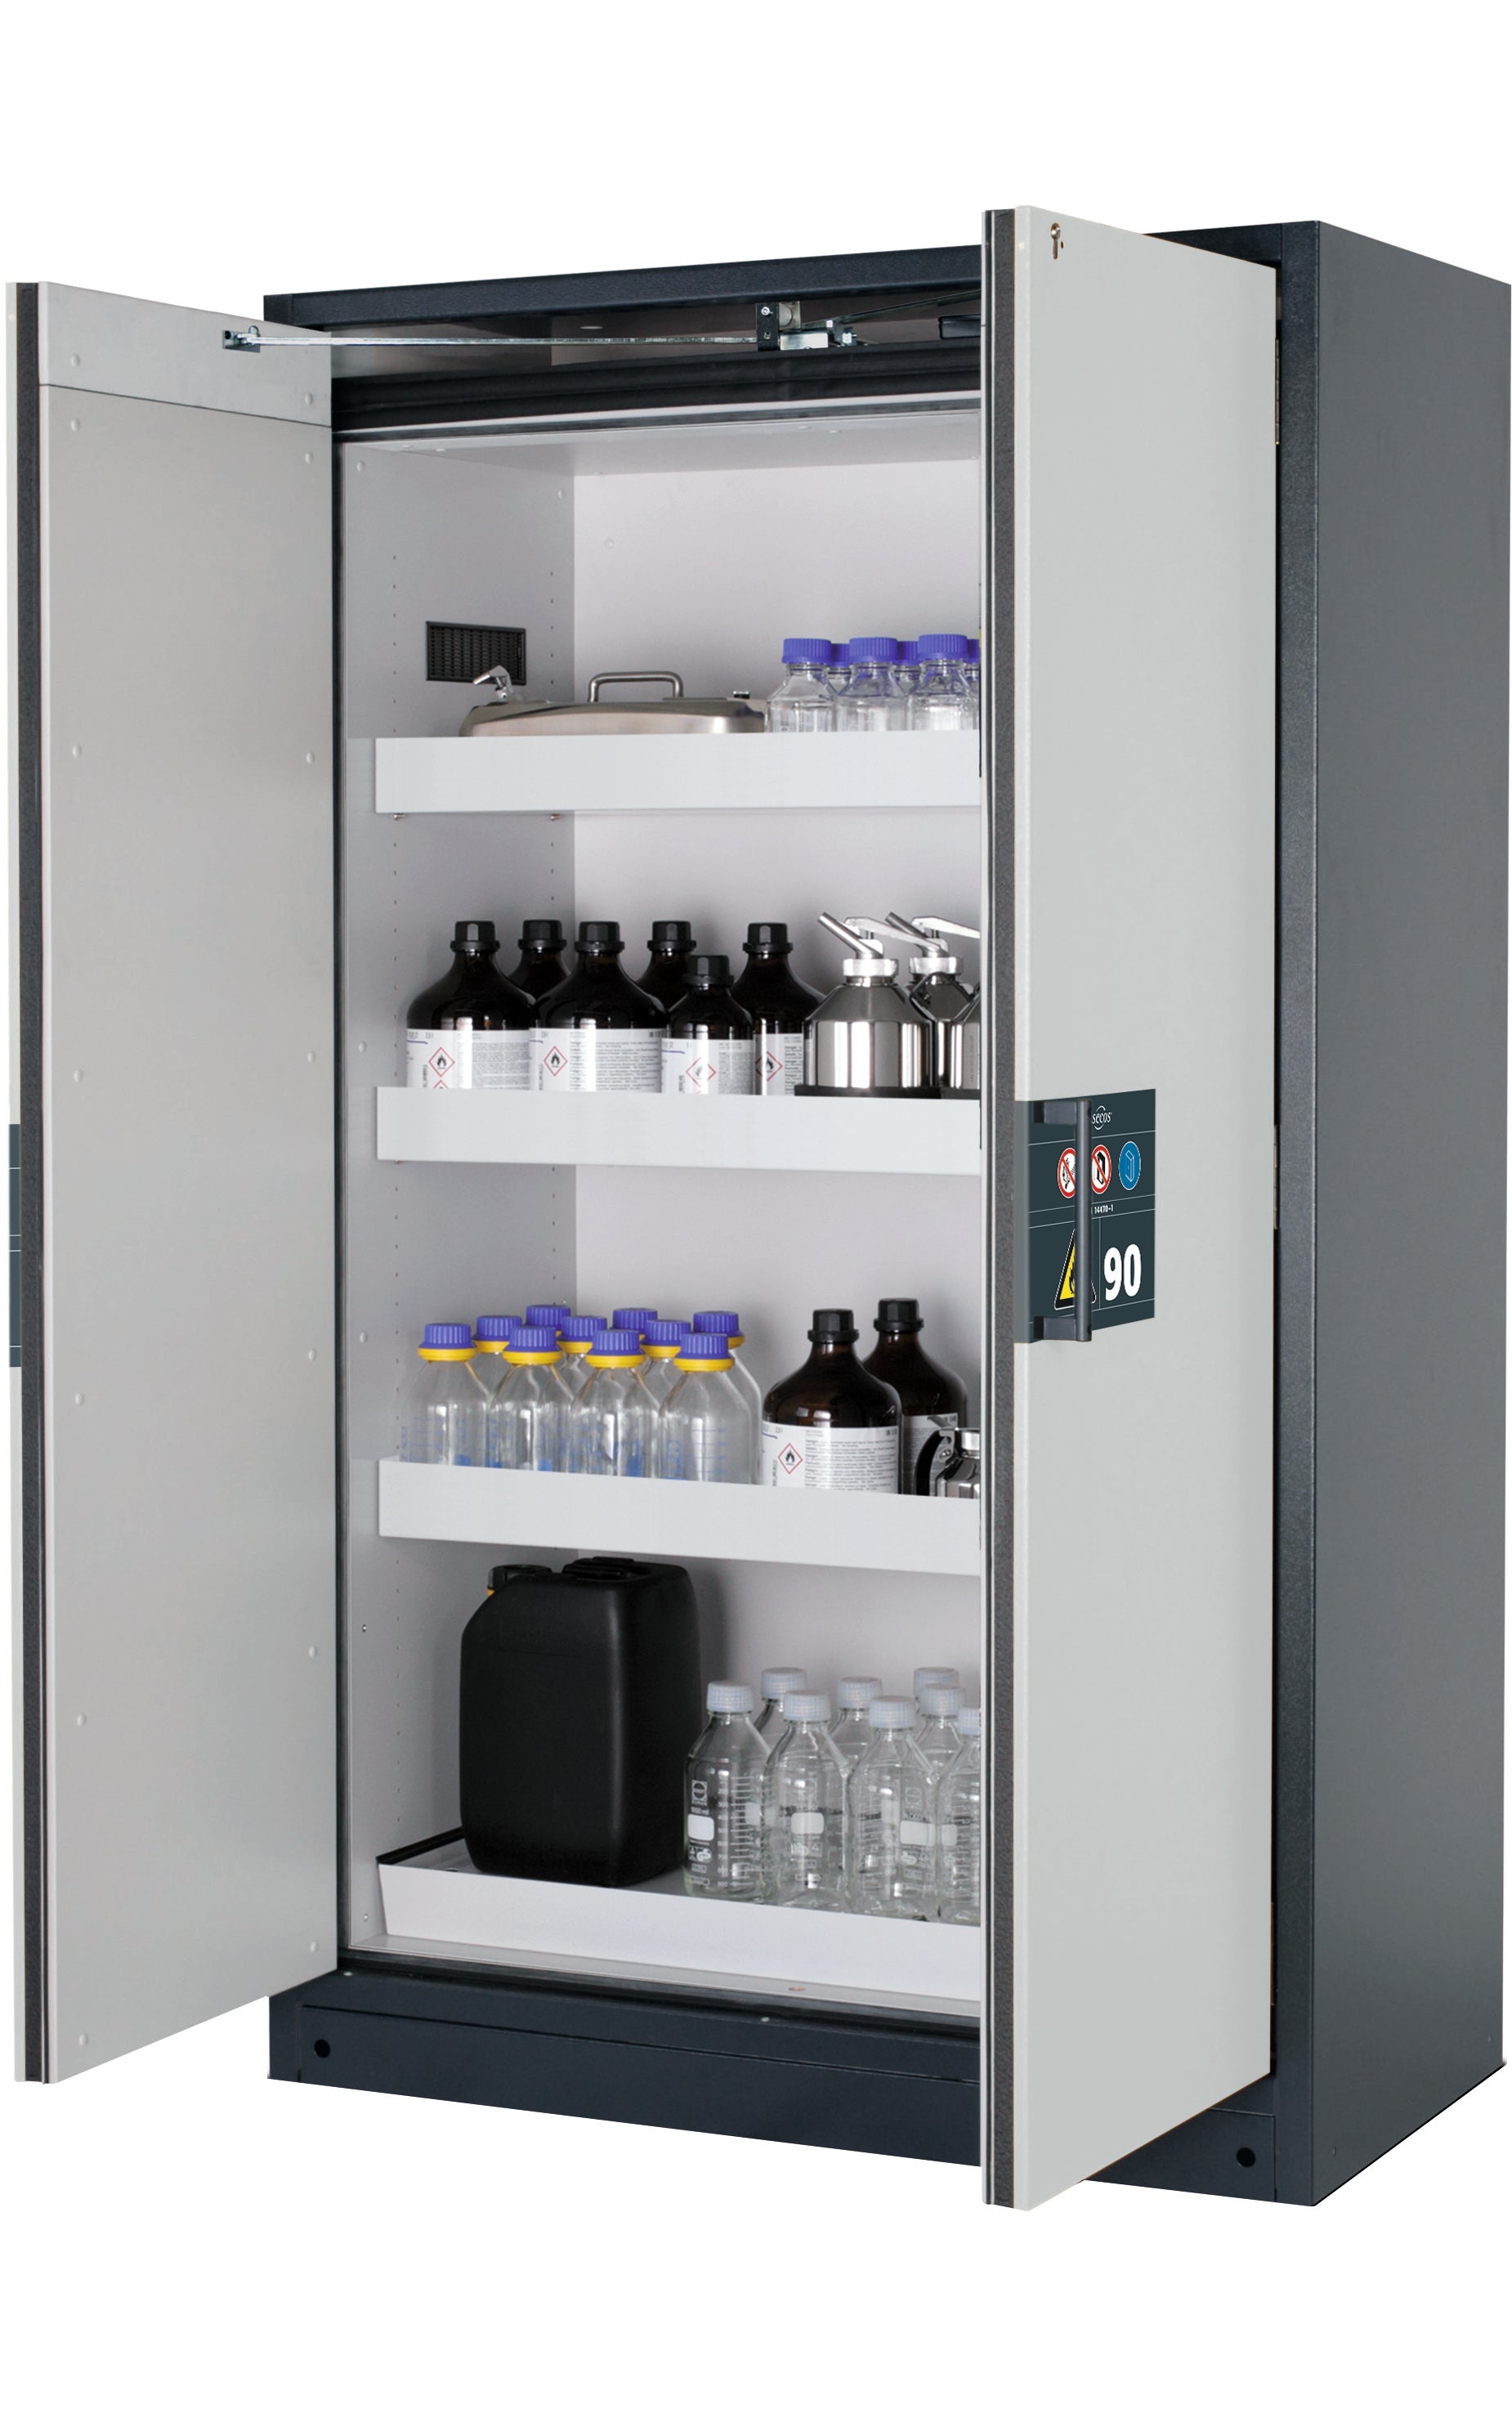 Type 90 safety storage cabinet Q-PEGASUS-90 model Q90.195.120.WDAC in light grey RAL 7035 with 3x tray shelf (standard) (sheet steel),